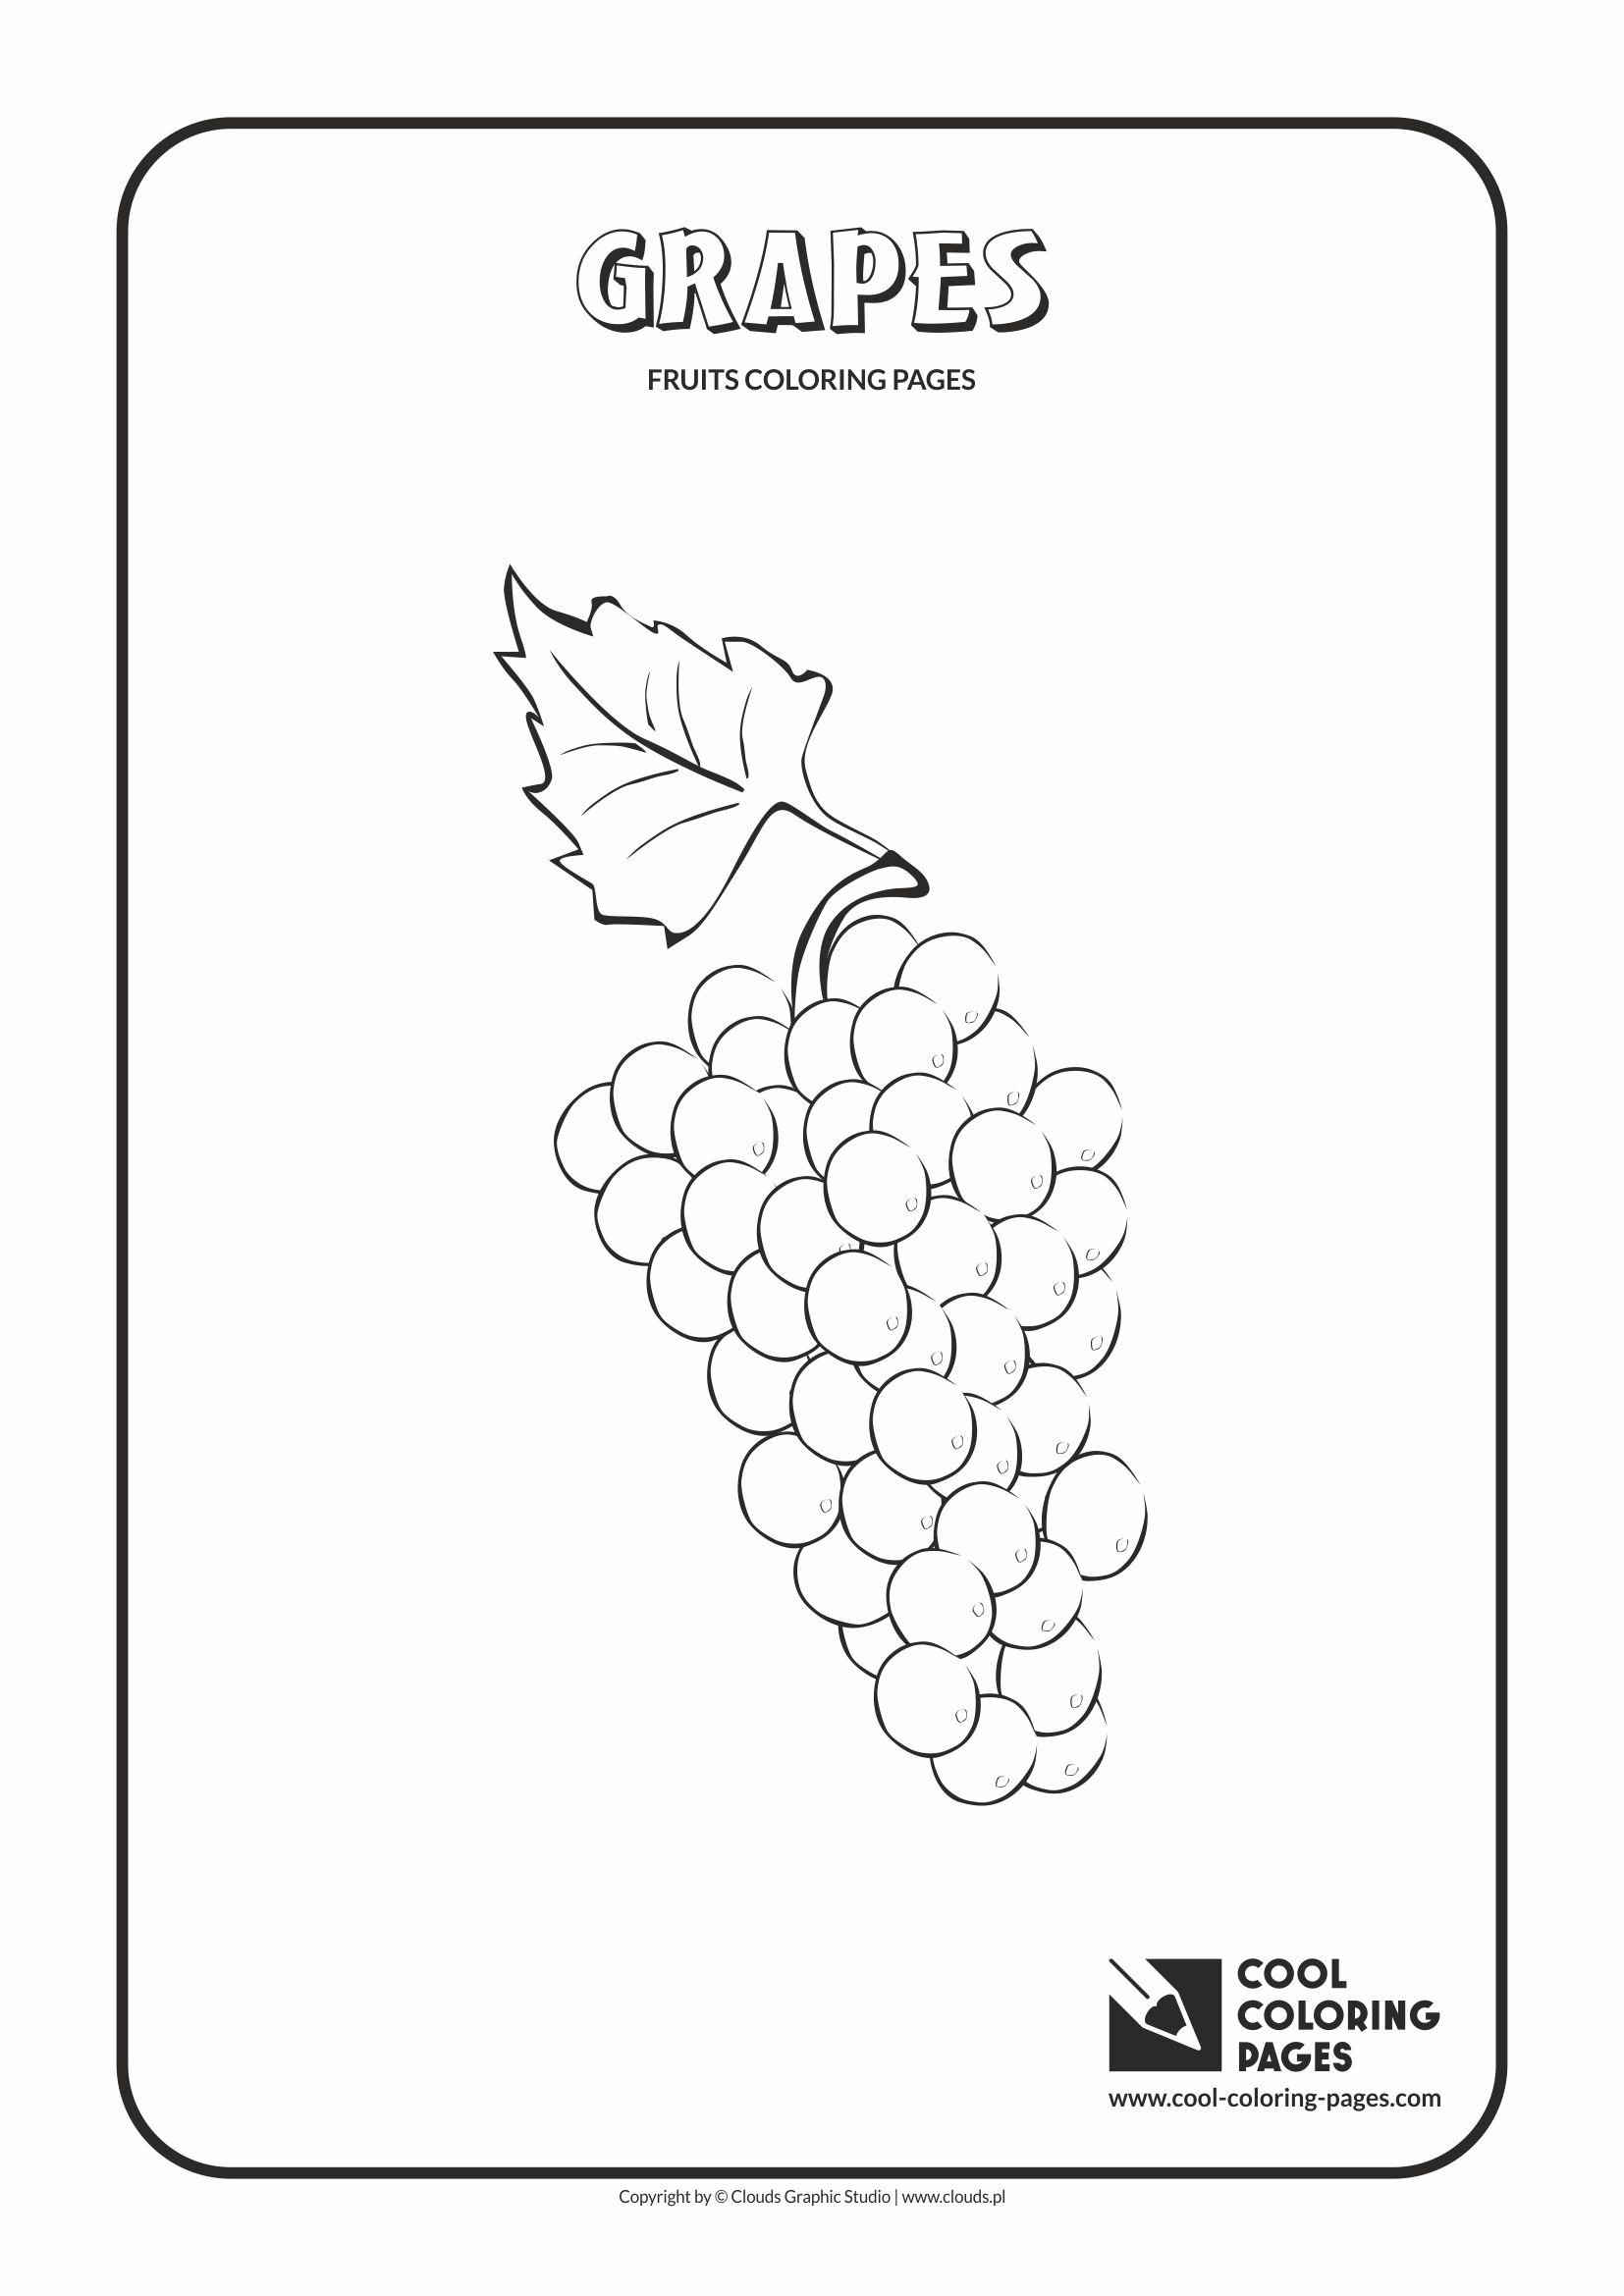 Cool Coloring Pages - Plants / Grapes / Coloring page with grapes